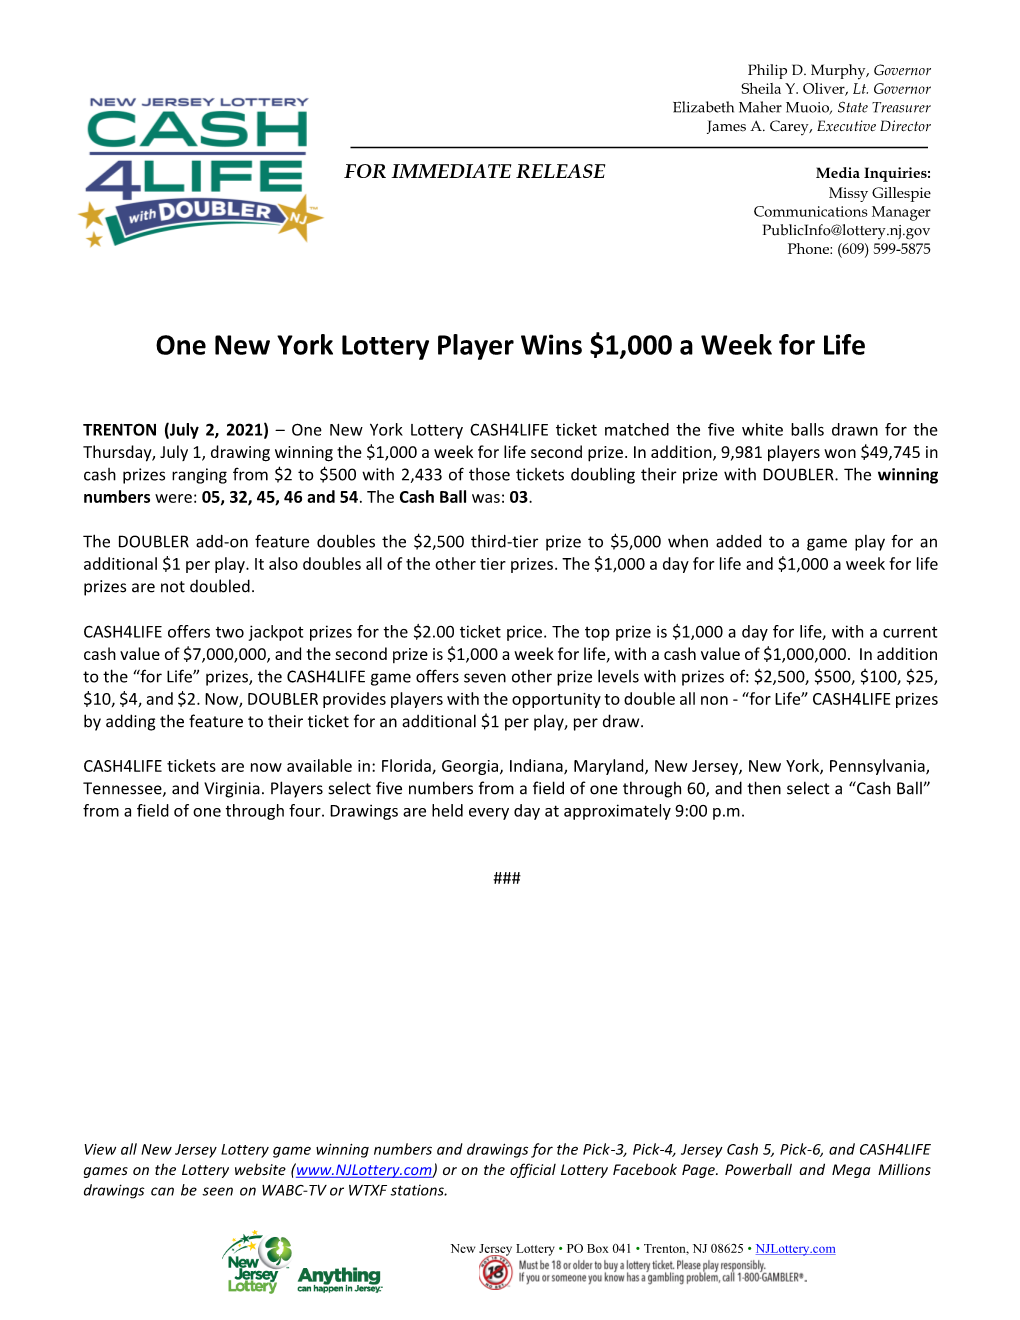 One New York Lottery Player Wins $1,000 a Week for Life